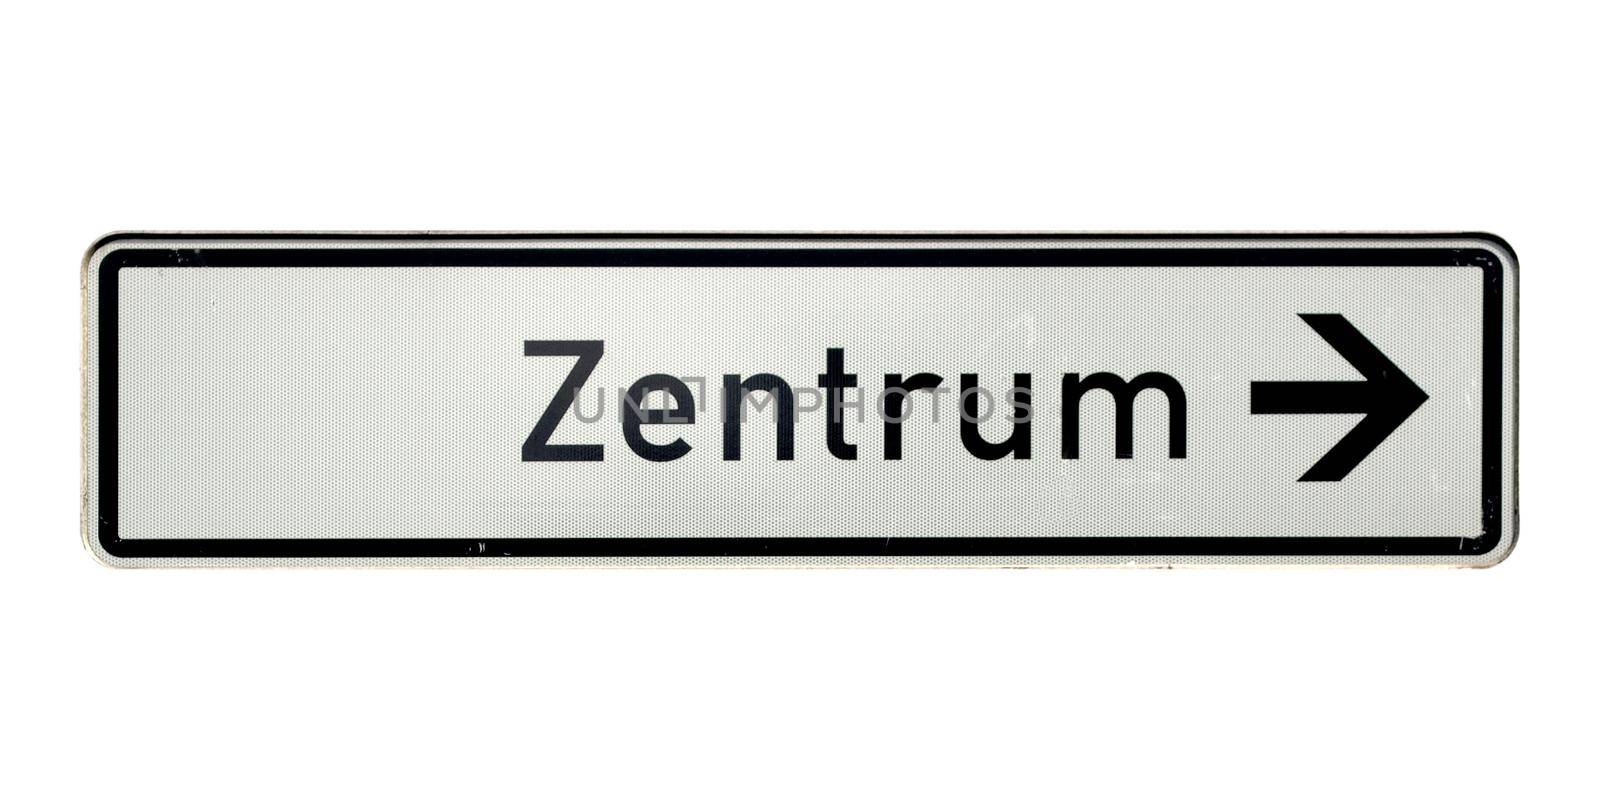 German traffic sign isolated over white background. Zentrum (translation: Centre)